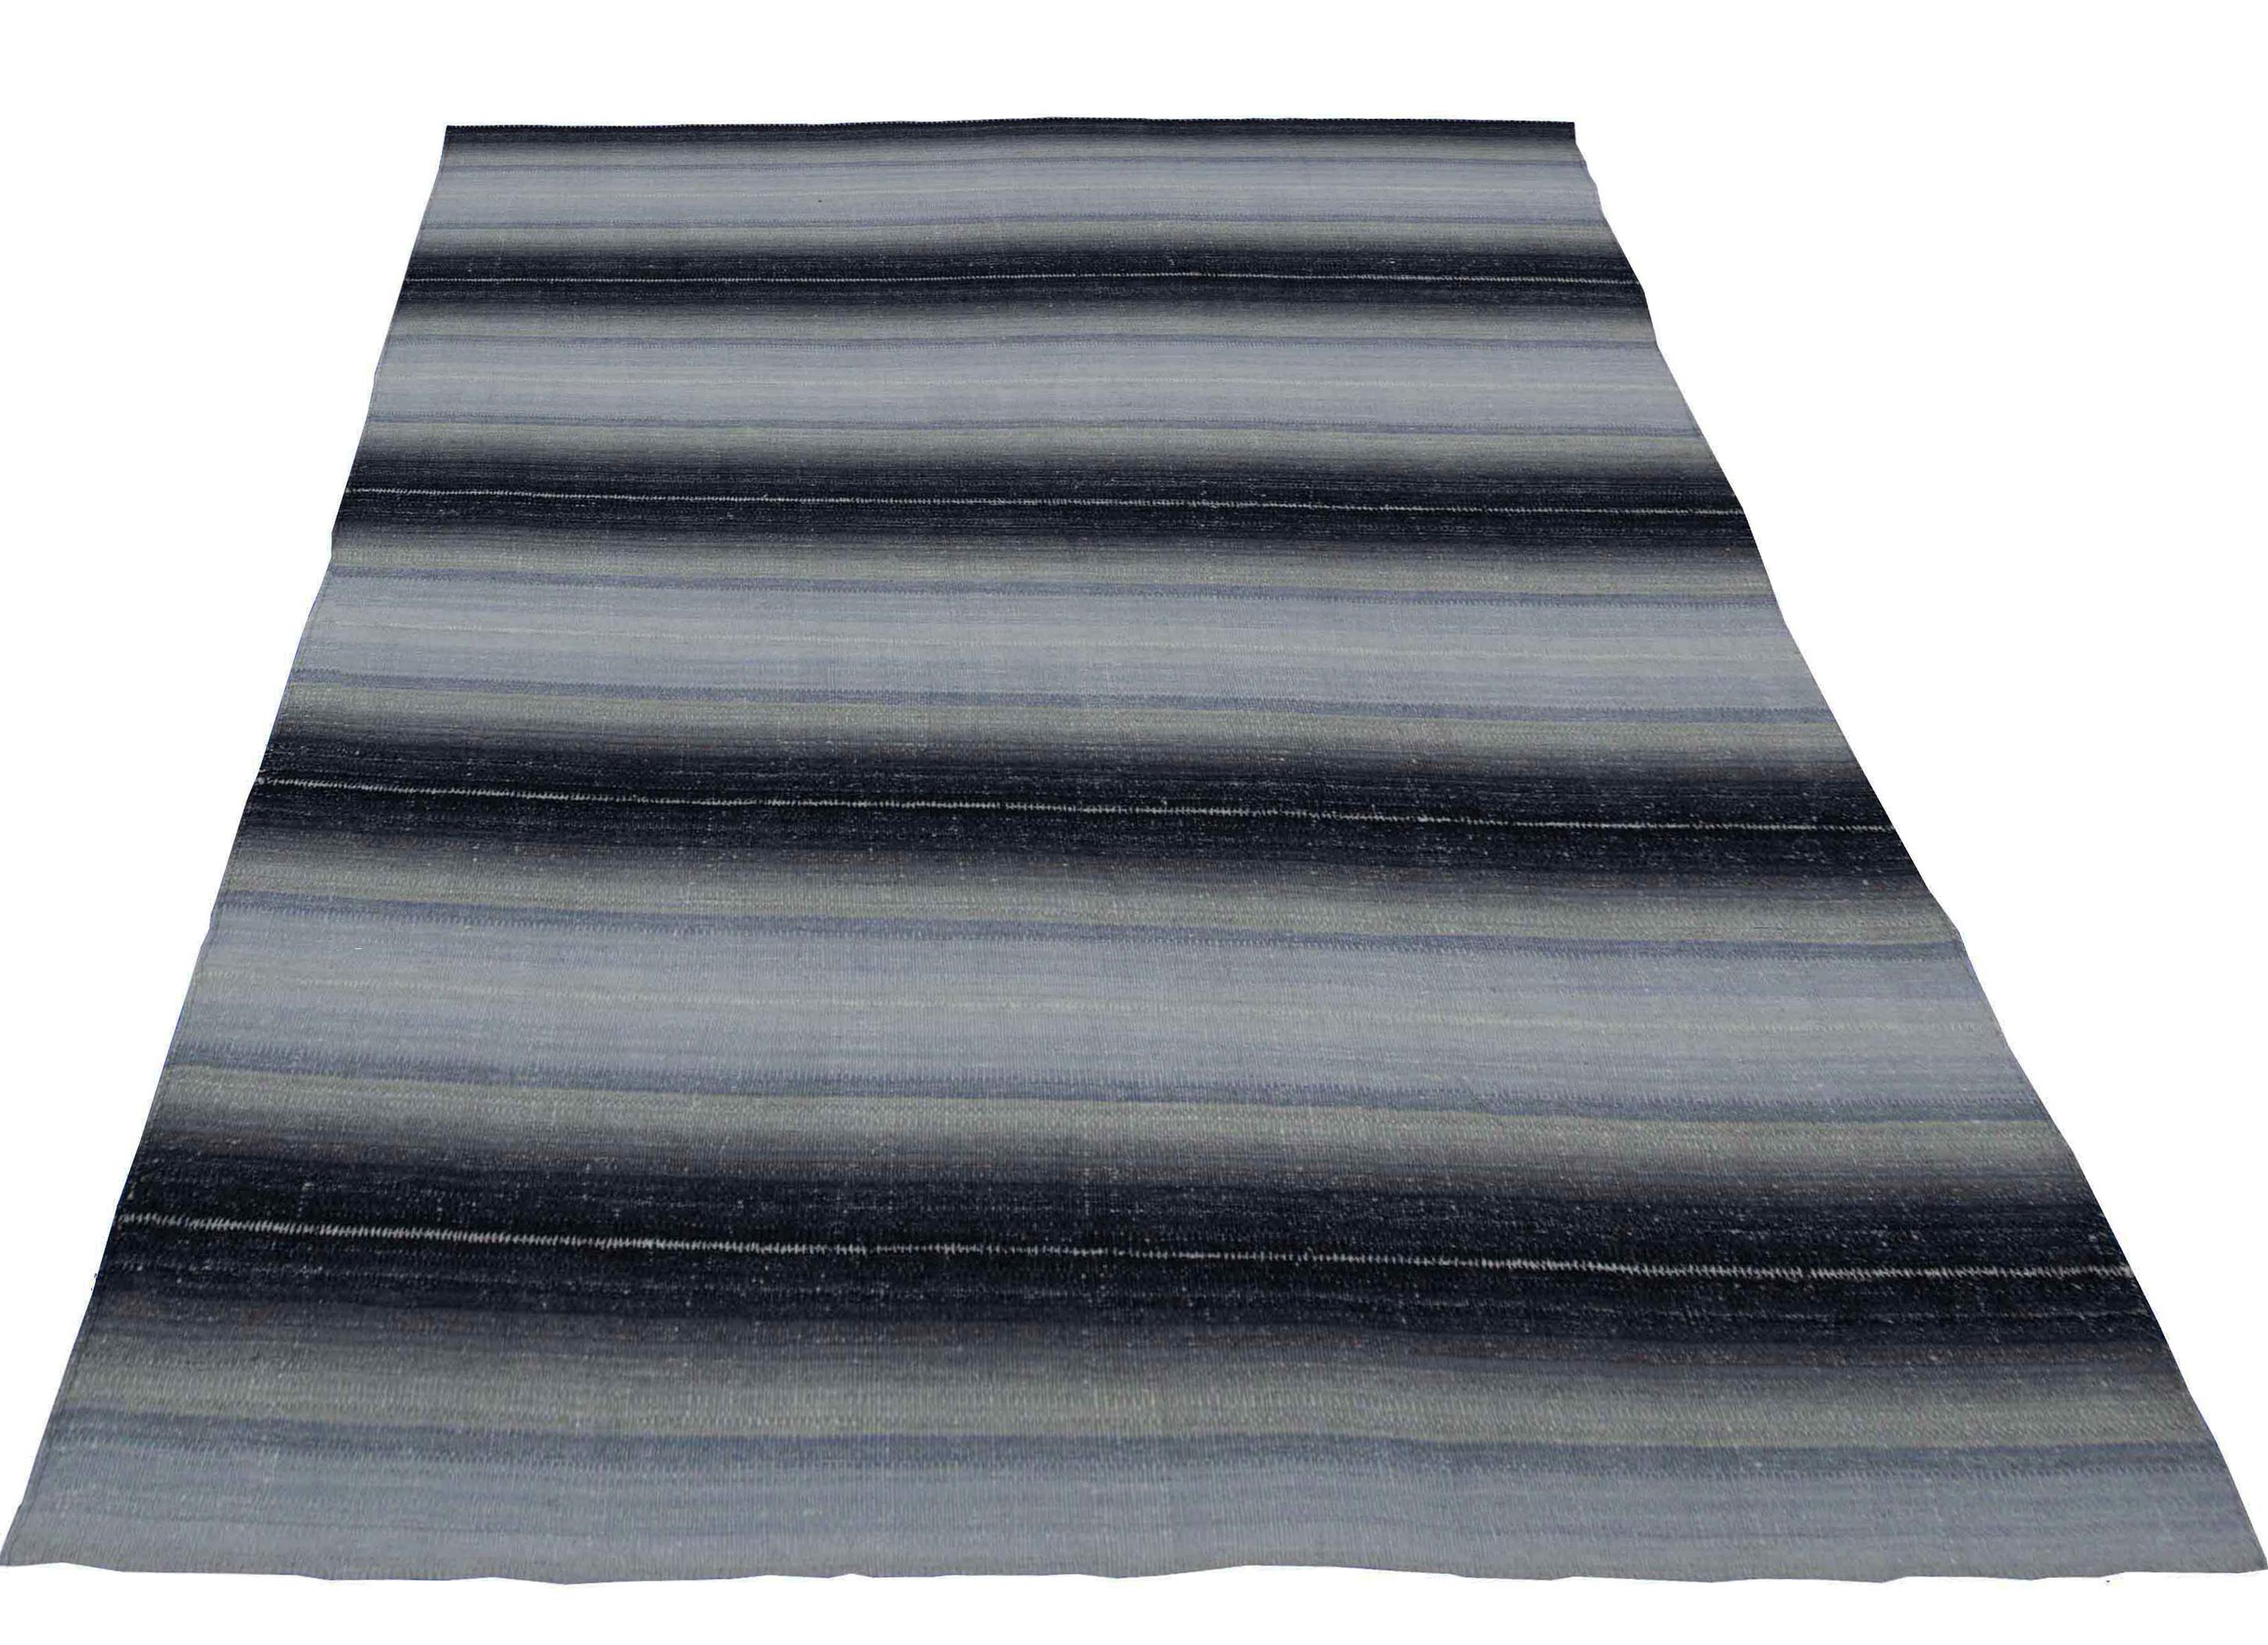 A new production Turkish rug handwoven from the finest sheep’s wool and colored with all-natural vegetable dyes that are safe for humans and pets. It’s a traditional Kilim flat-weave design featuring a lovely beige field with black and gray stripes.